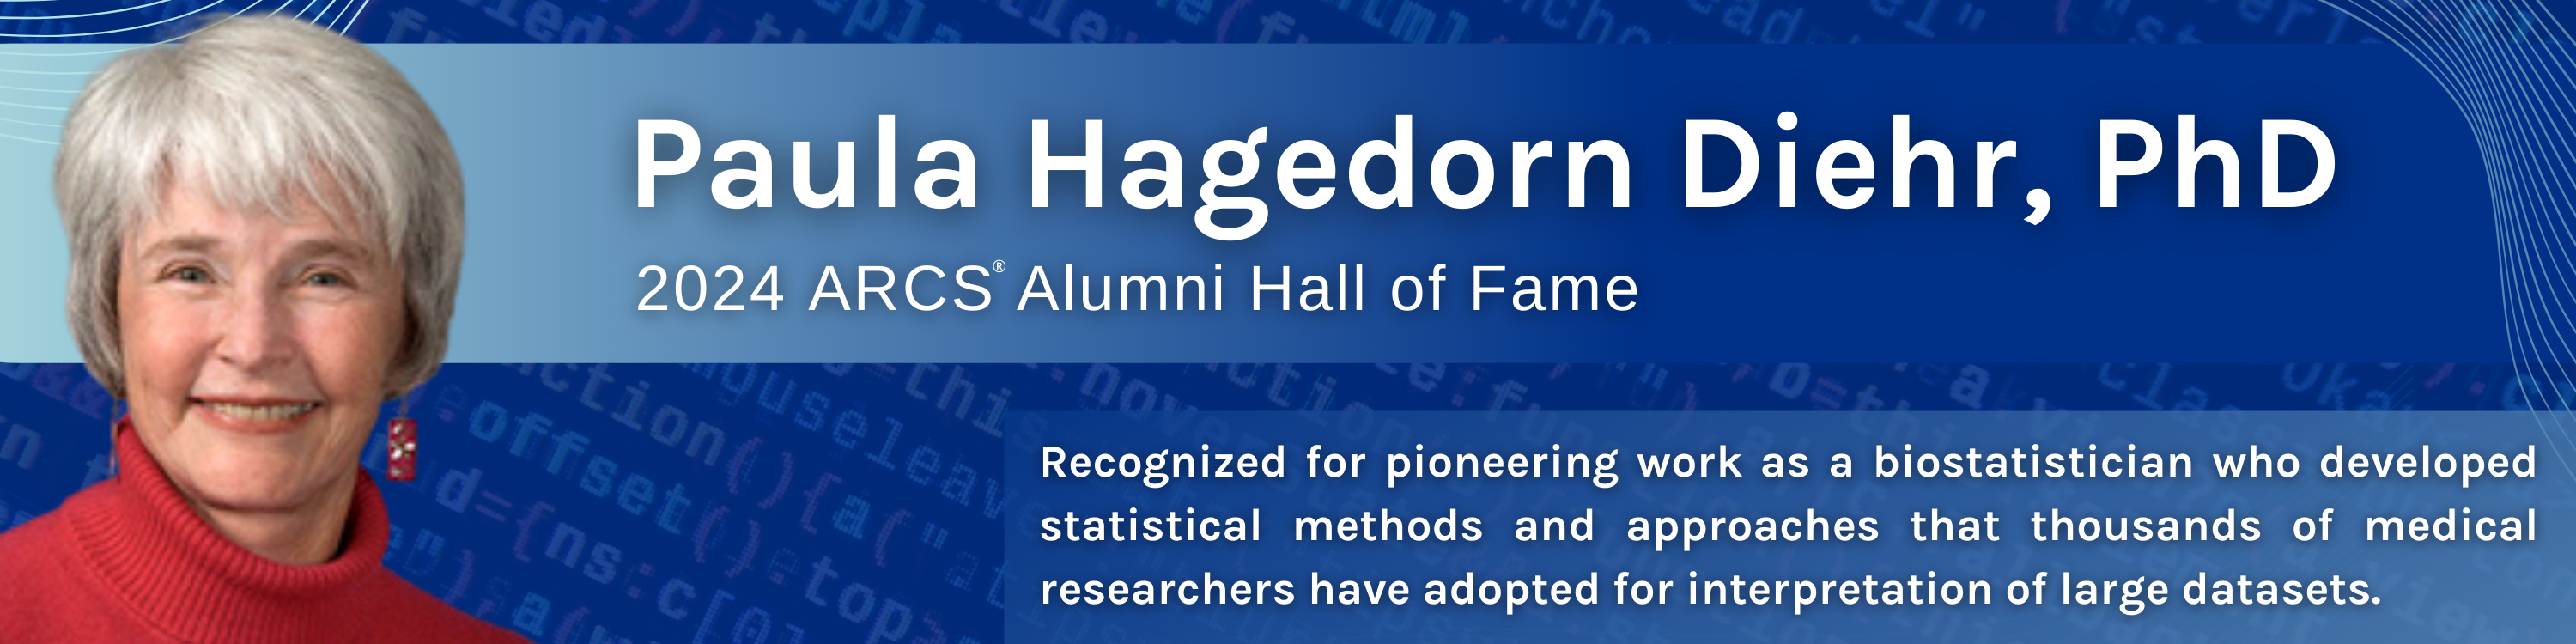 Paula Hagedorn Diehr, PhD, 2024 ARCS Alumni Hall of Fame, Recognized for pioneering work as a biostatistician who developed statistical methods and approaches that thousands of medical researchers have adopted for interpretation of large datasets.